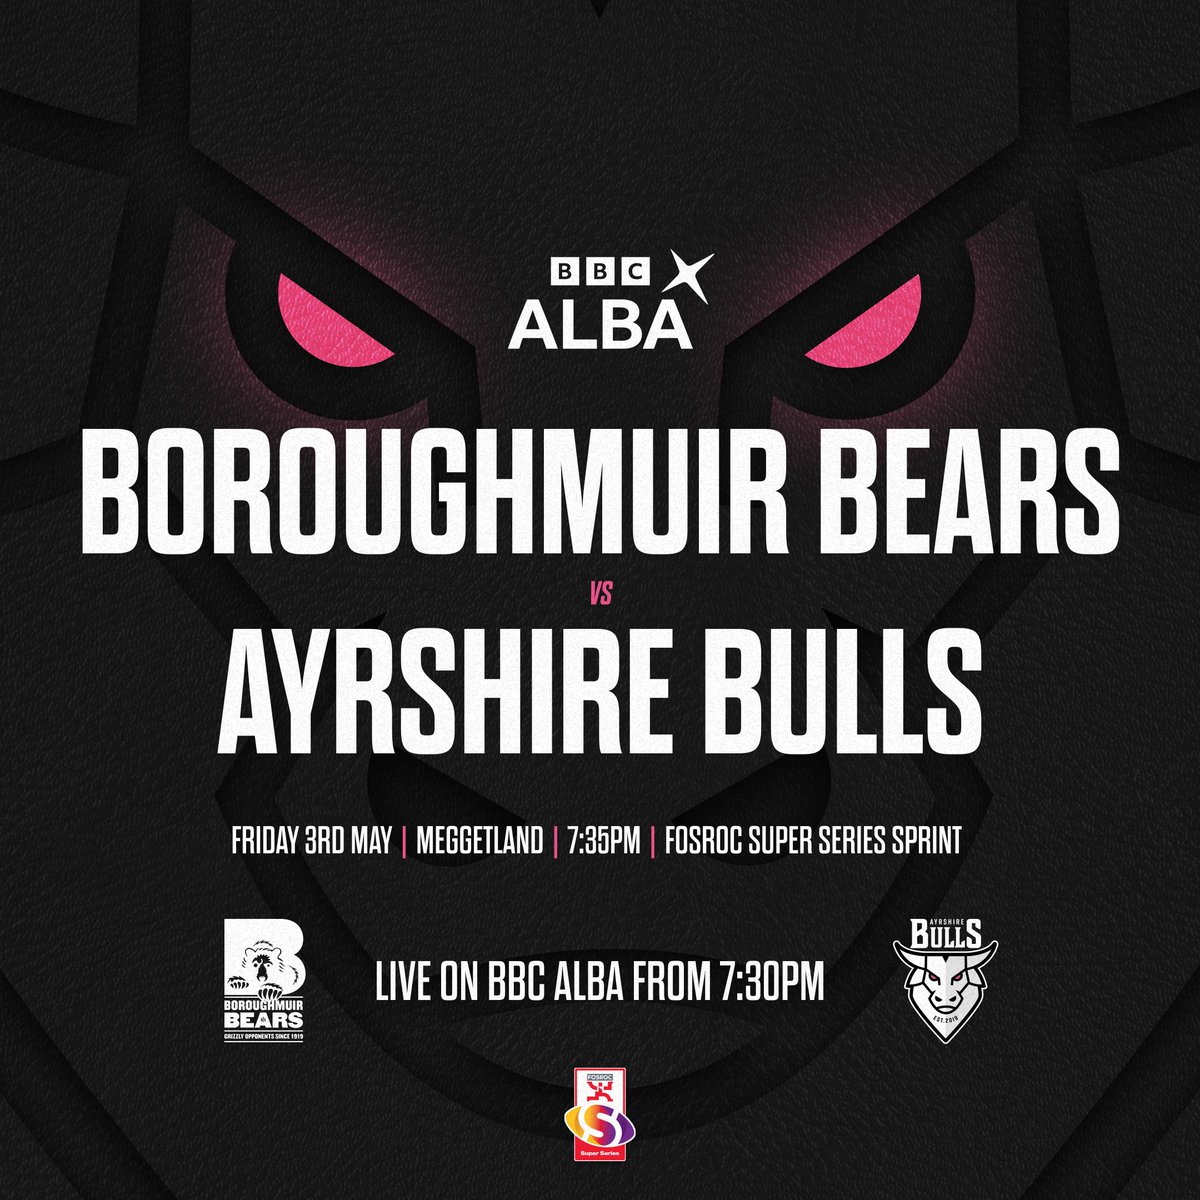 Fixture Update👇 This Friday nights fixture between @StirlingWolves and @GlasgowWarriors is unable to go ahead due to an insufficient number of front row players available to play for the professional side 📺 Boroughmuir Bears v Ayrshire Bulls will now be shown live on BBC ALBA